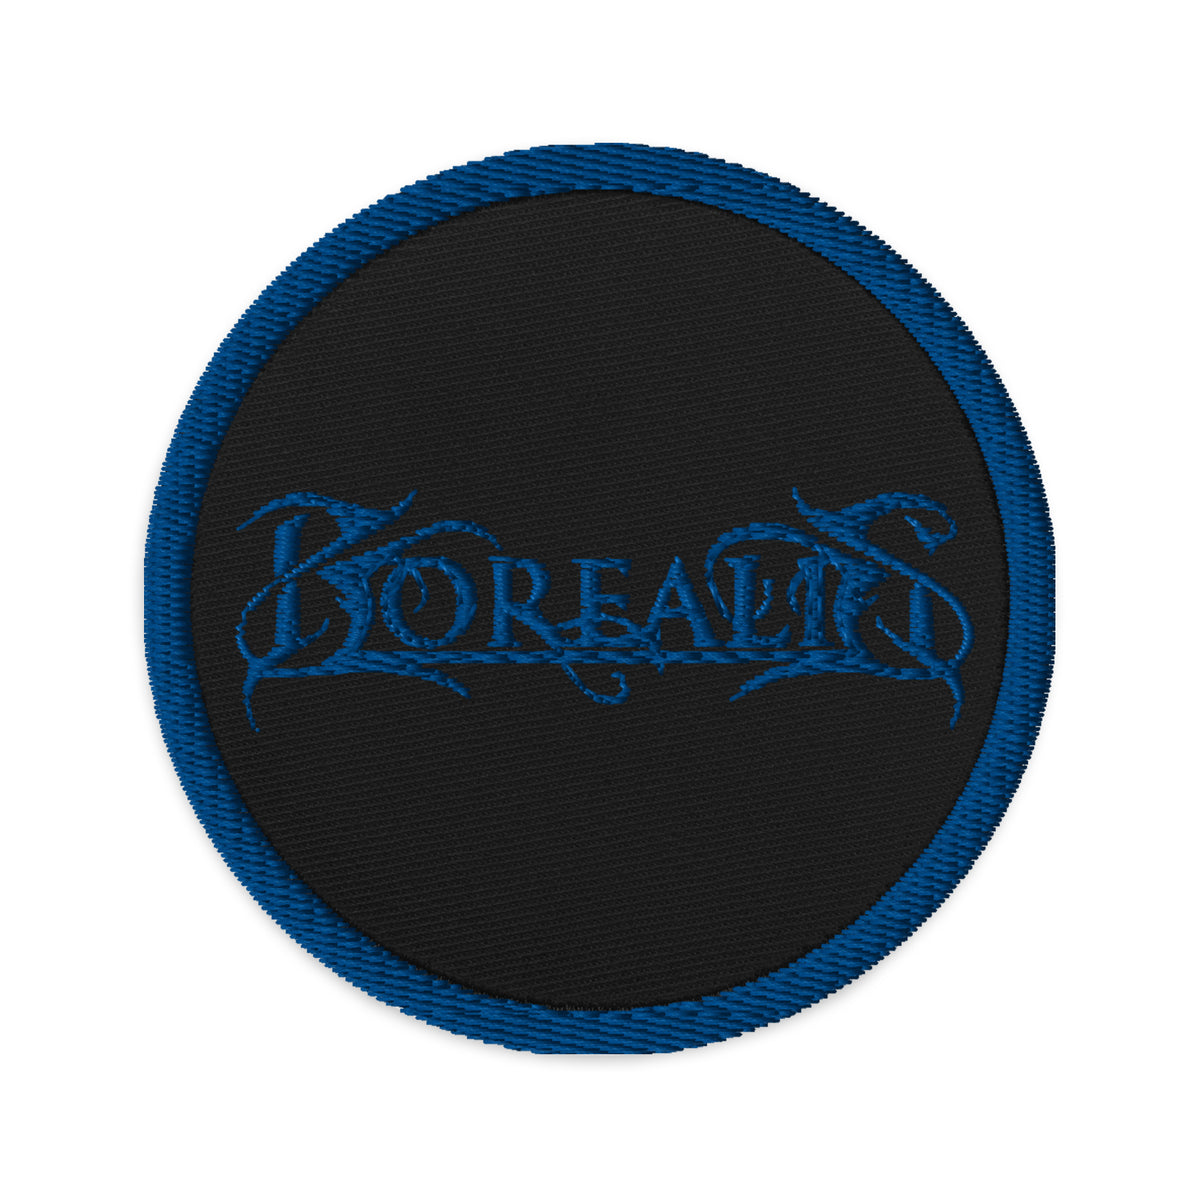 Borealis Embroidered Patch - Royal Blue